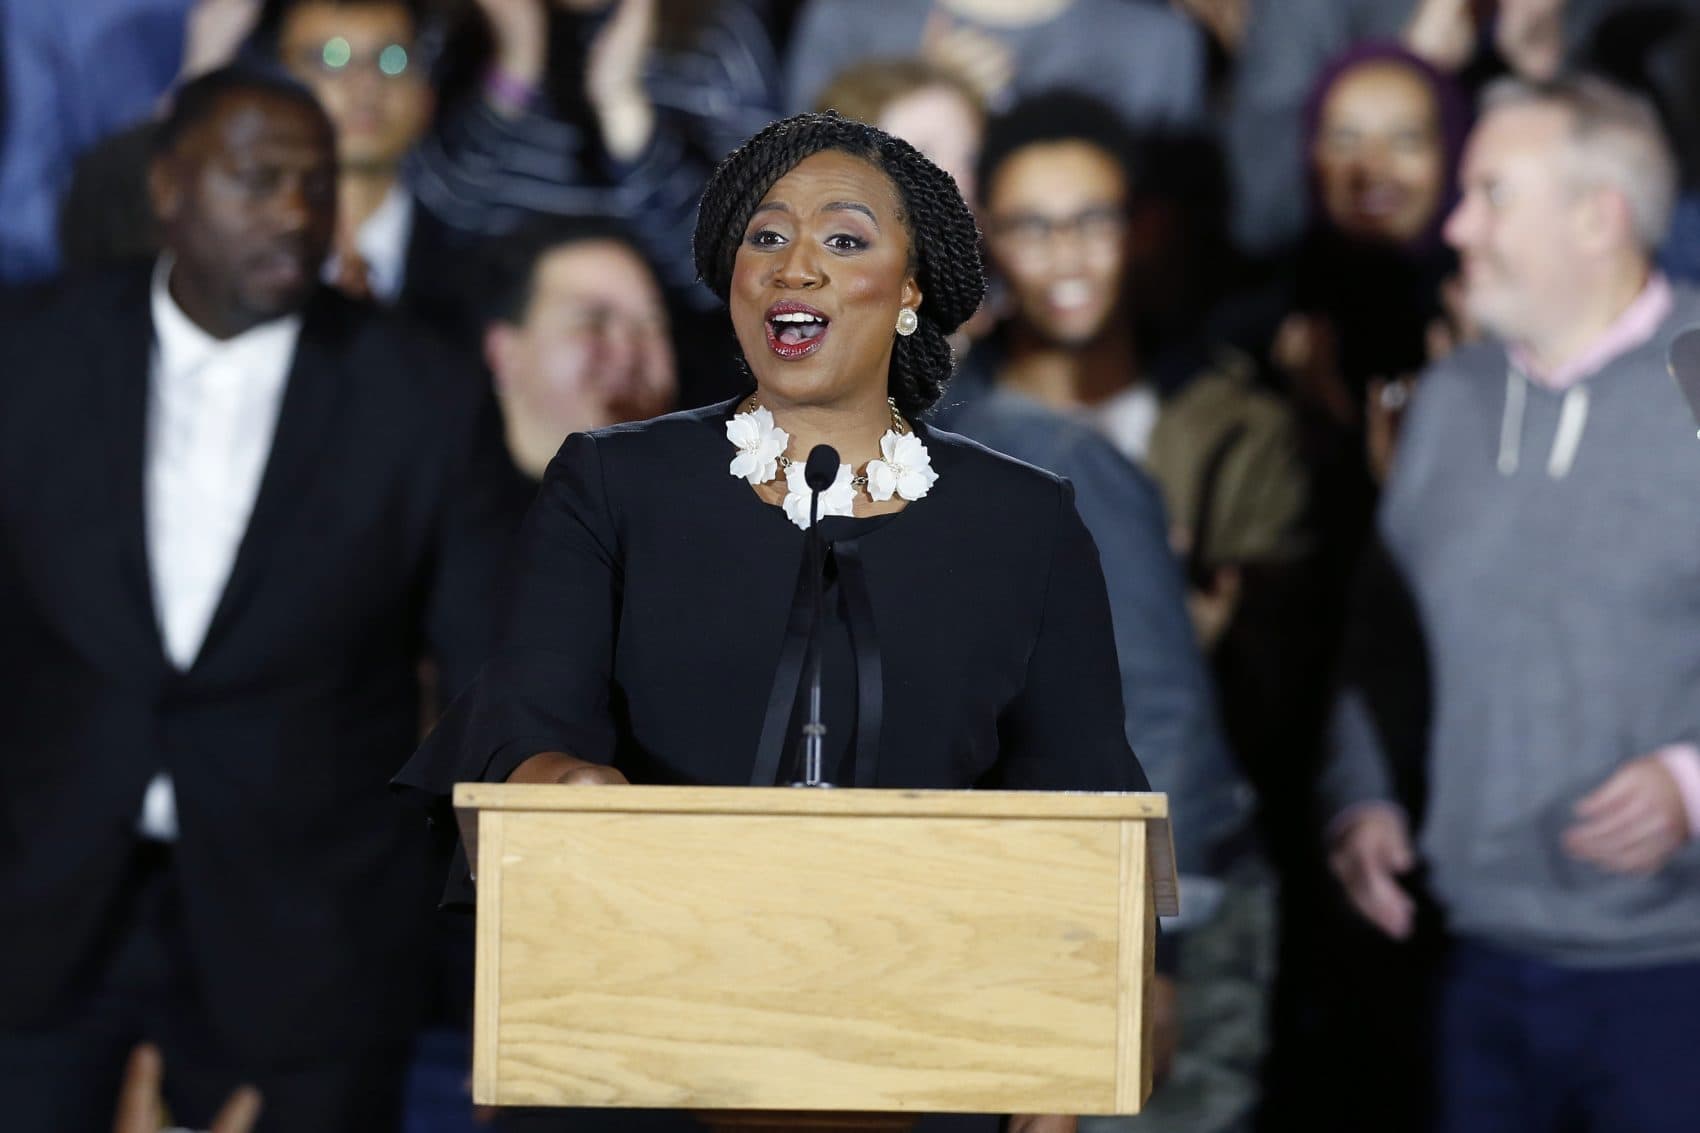 Democrat Ayanna Pressley gives her victory speech at an election night party after being elected to represent Massachusetts' 7th congressional district, Tuesday, Nov. 6, 2018, in Boston. (Michael Dwyer/AP)